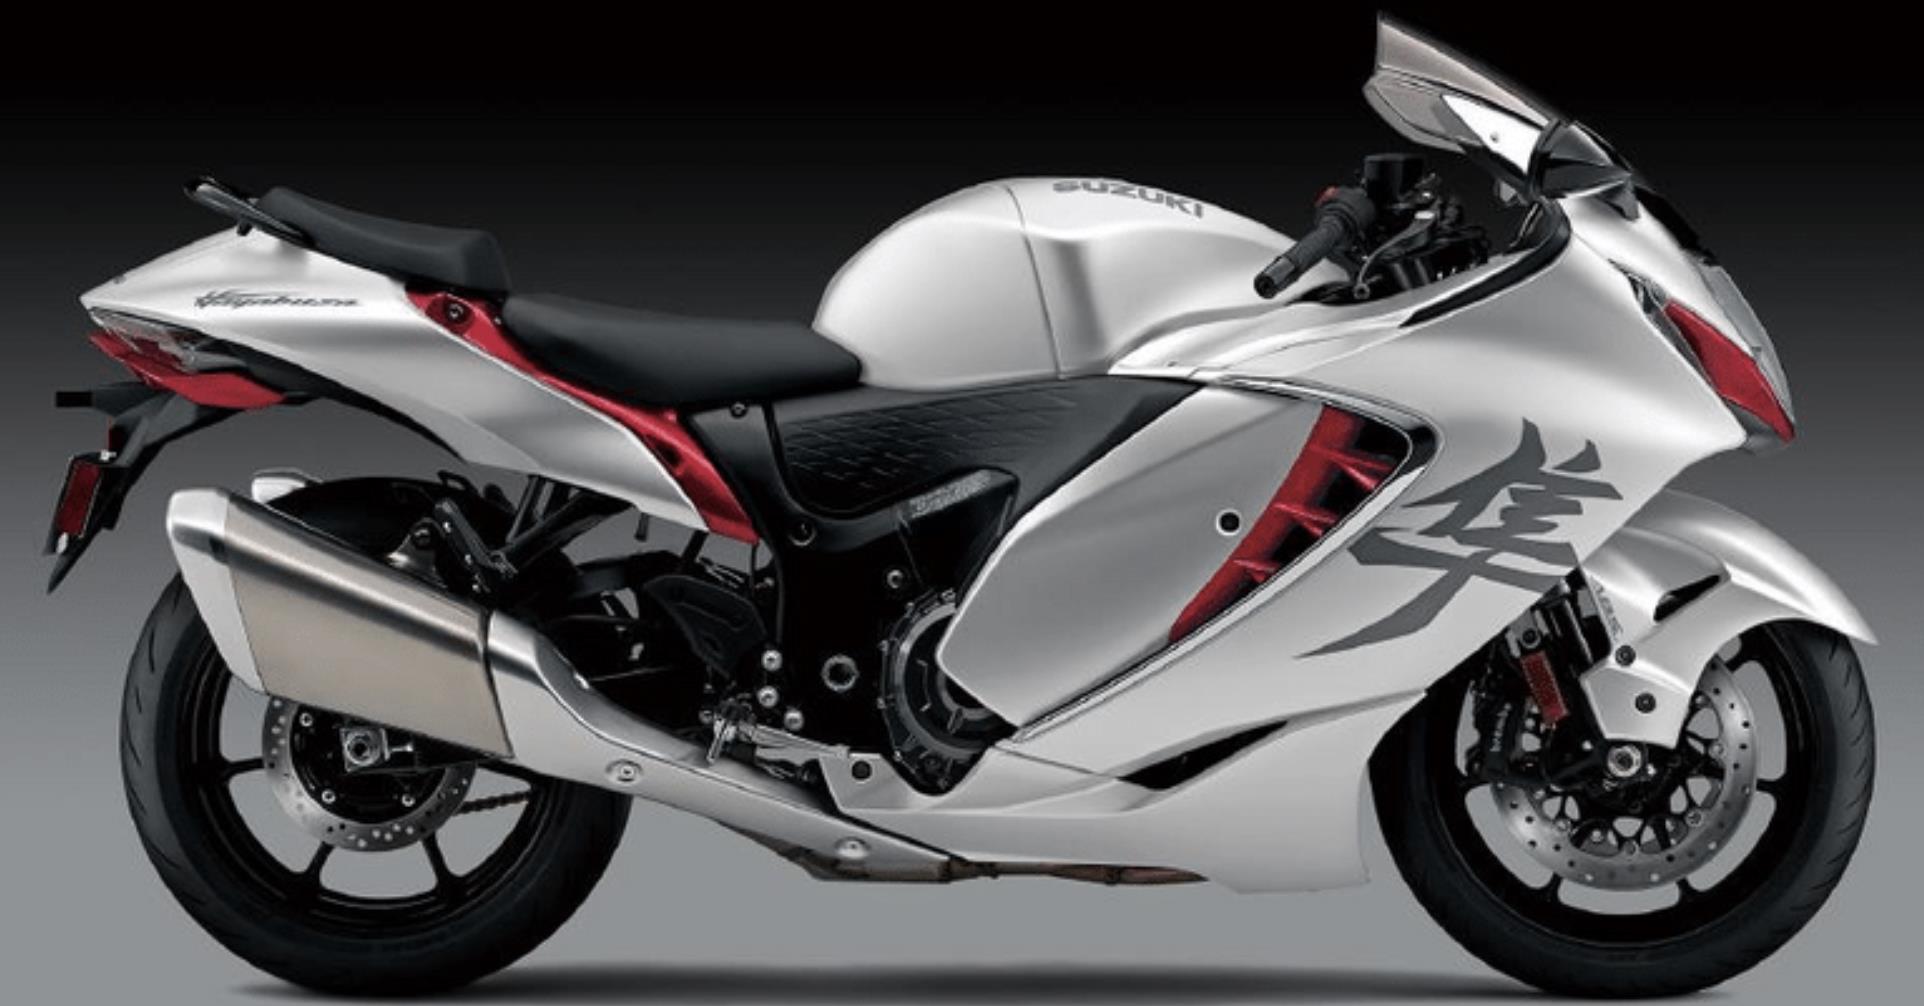 2021 Suzuki Hayabusa GSX1300R Specs and Expected Price in